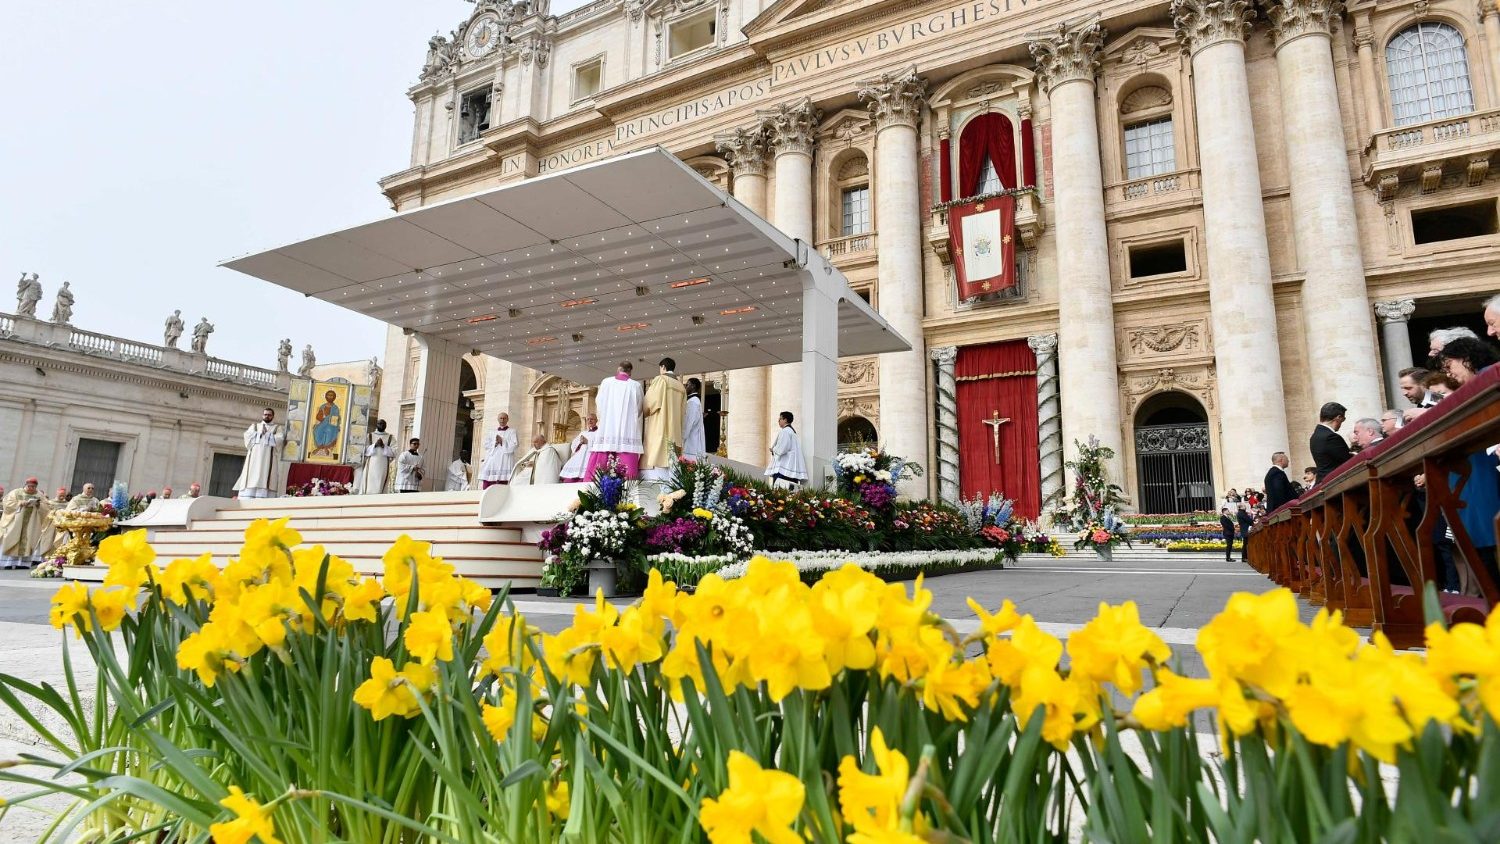 Pope Francis presides over Easter Mass